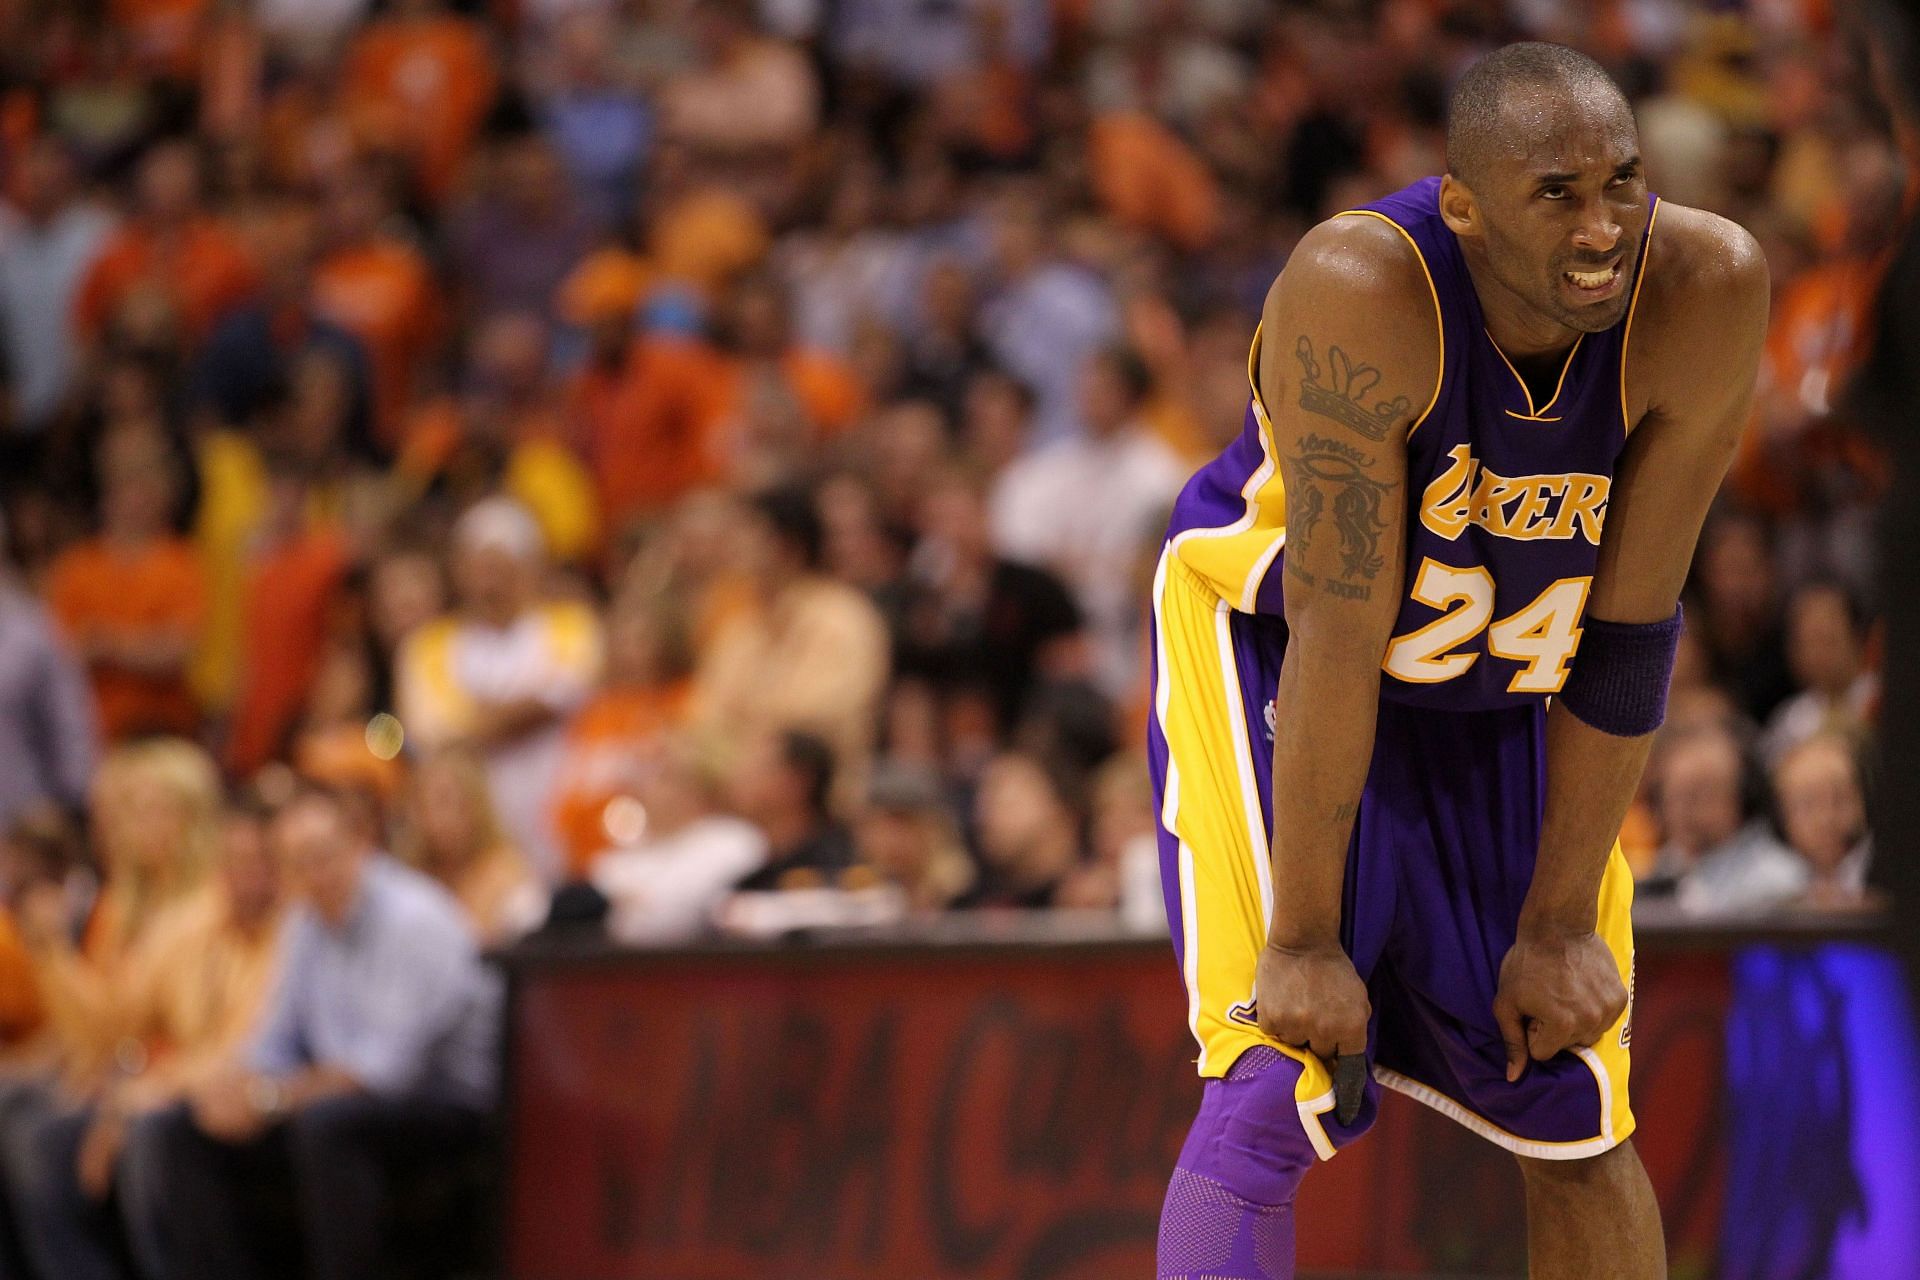 “Kobe didn’t have a fear of nothing to ask nobody to get better”